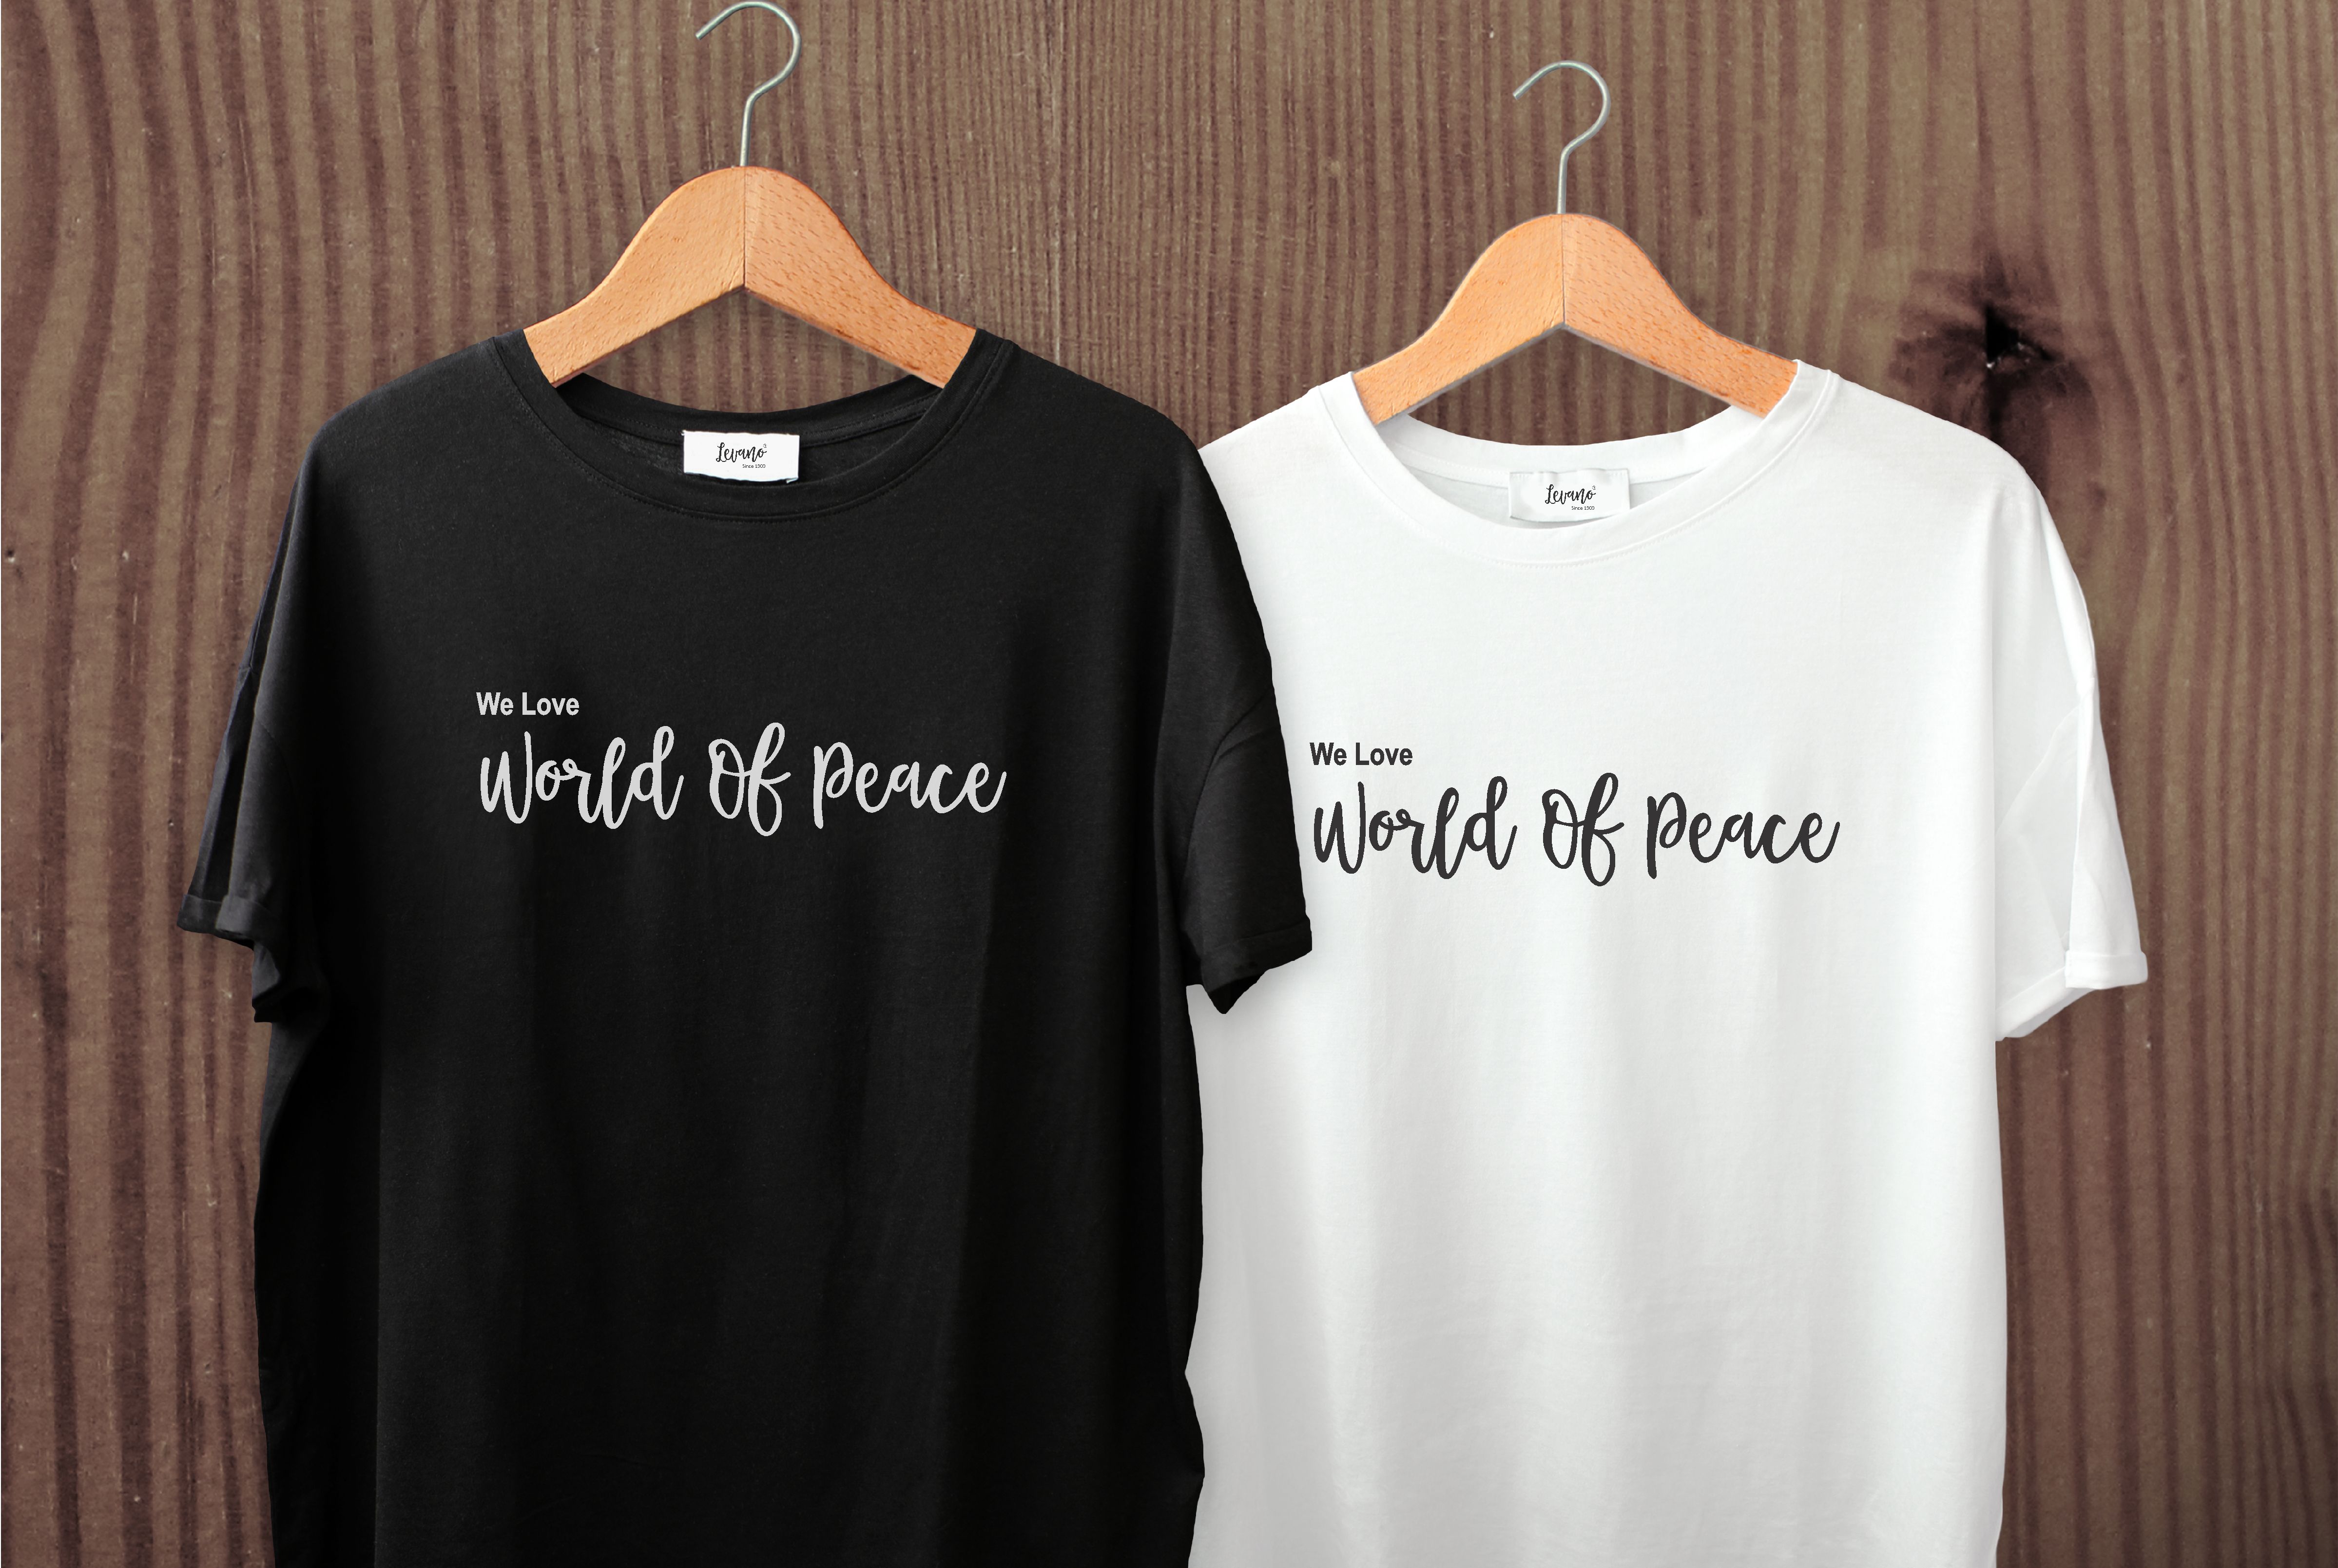 Two t-shirts with simple lettering.